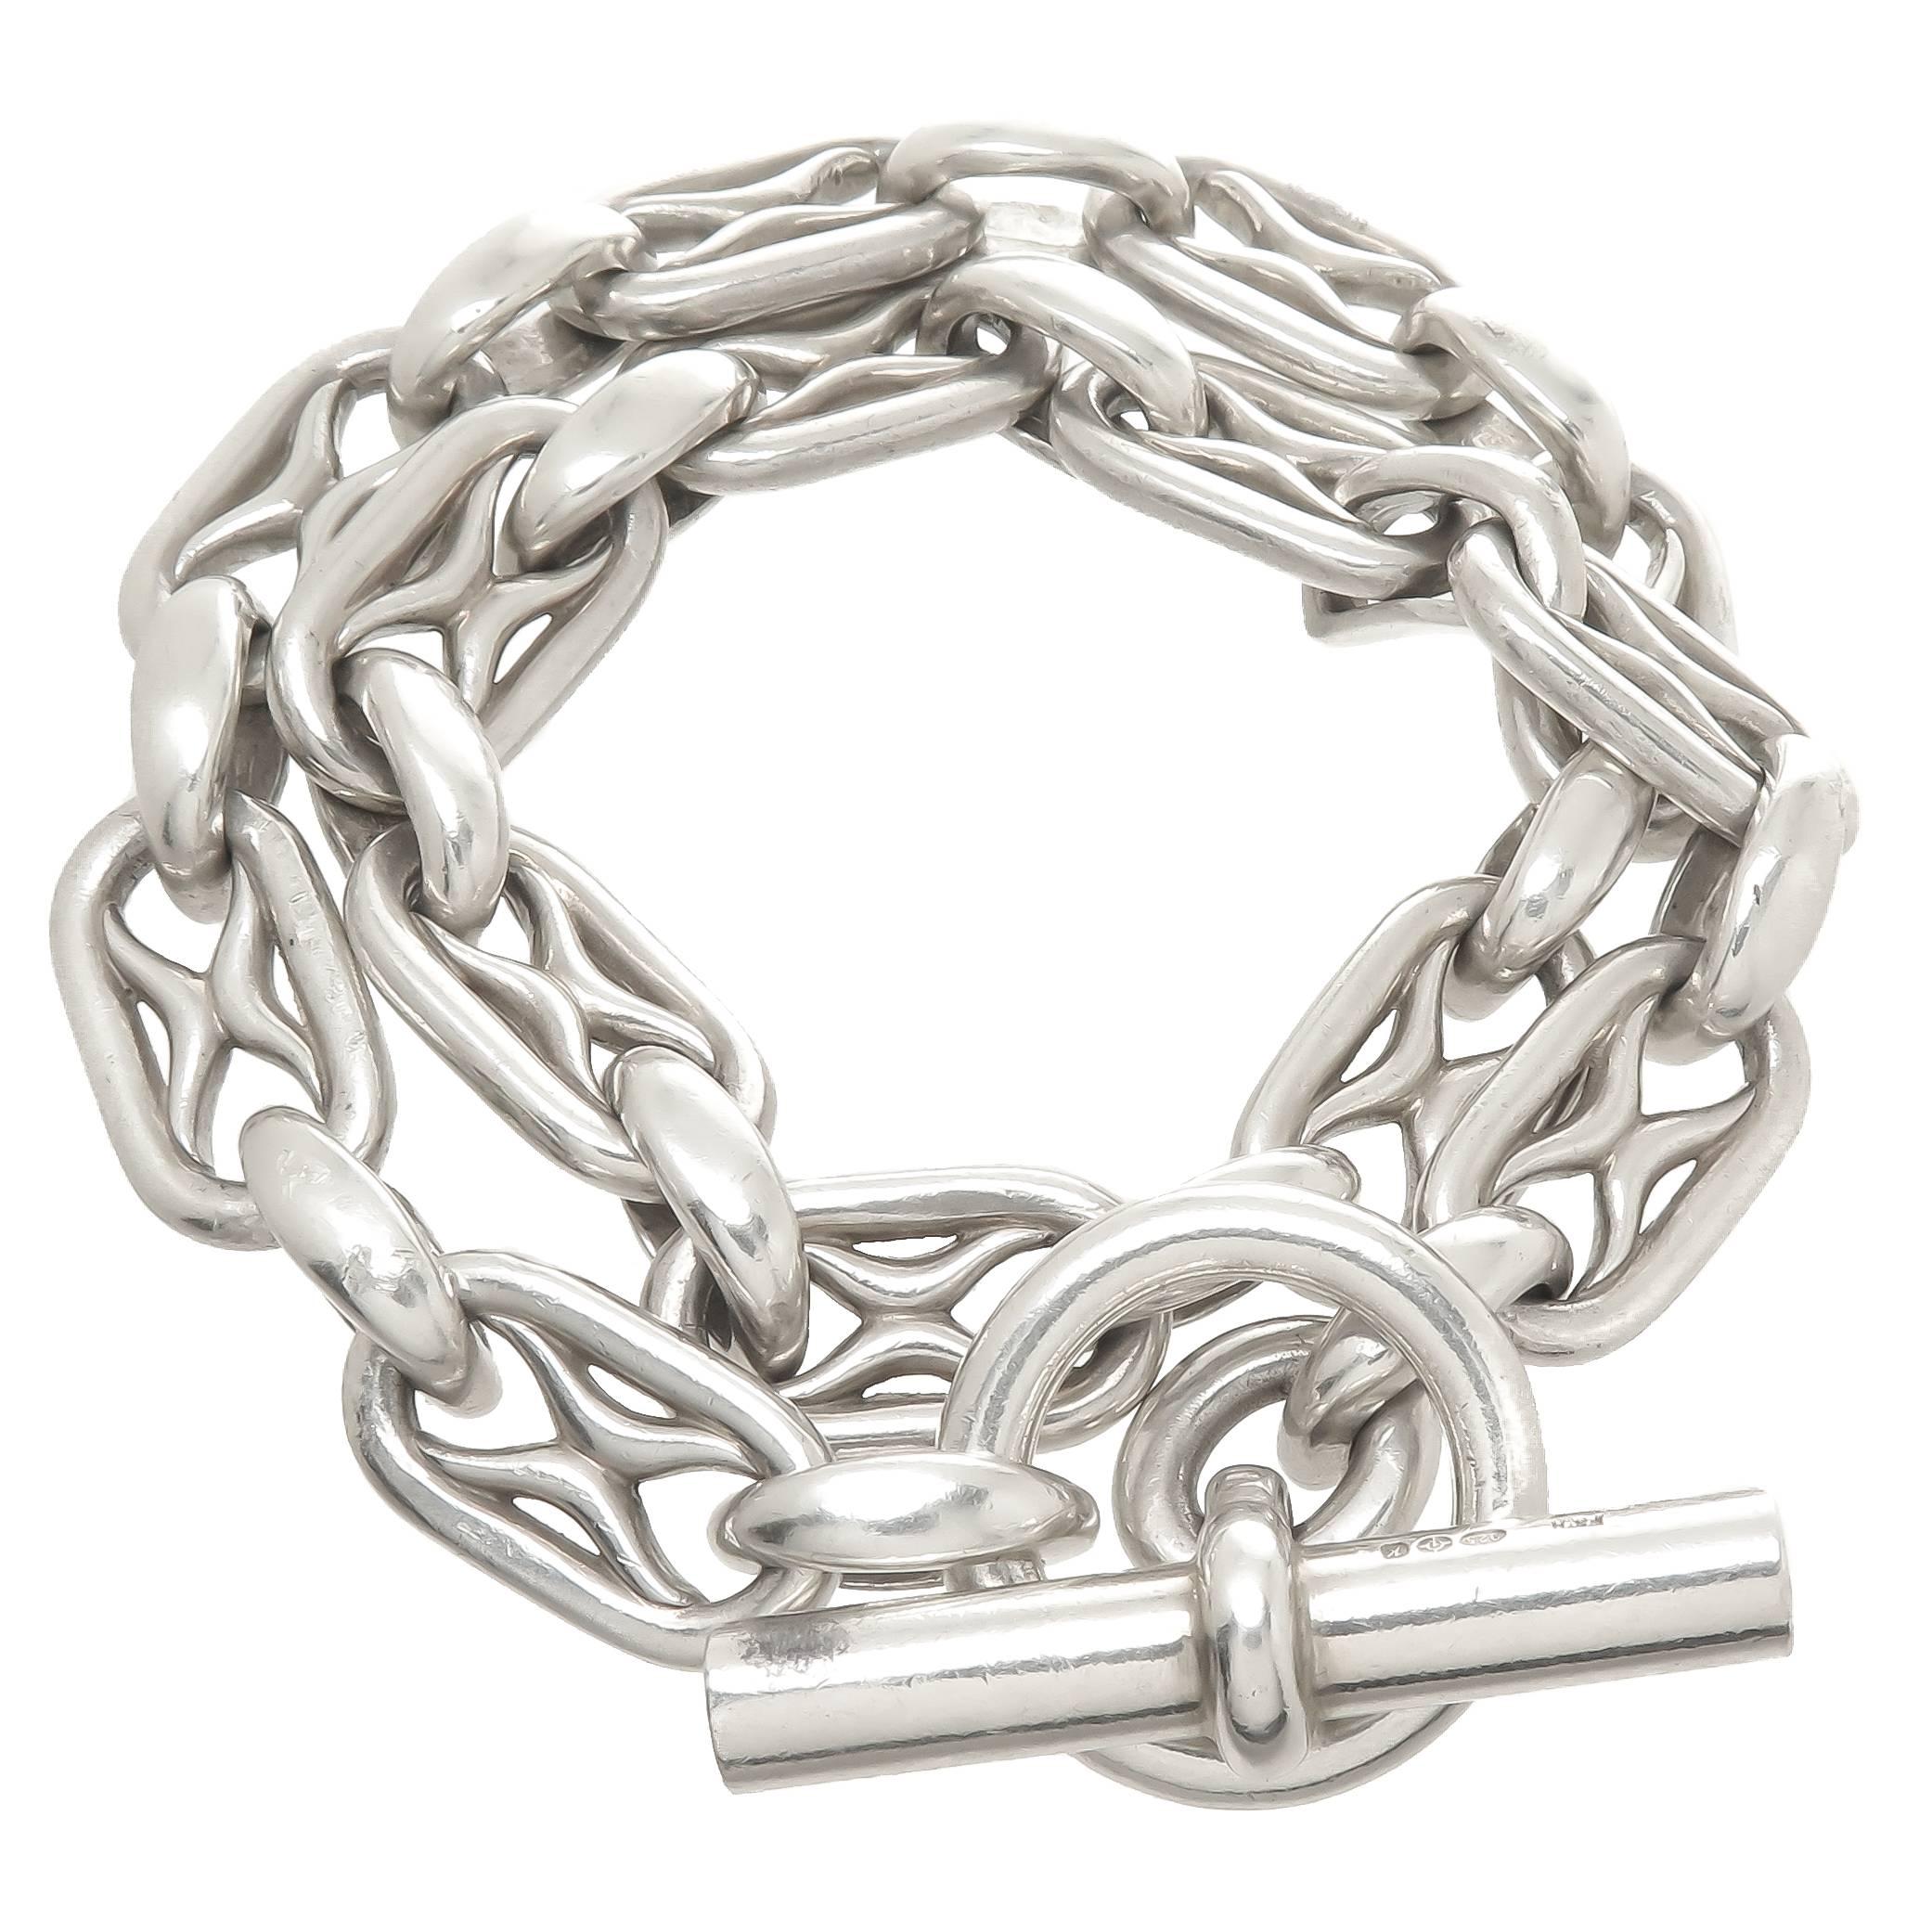 Hermes Silver Link Double Wrap Bracelet with Toggle Clasp